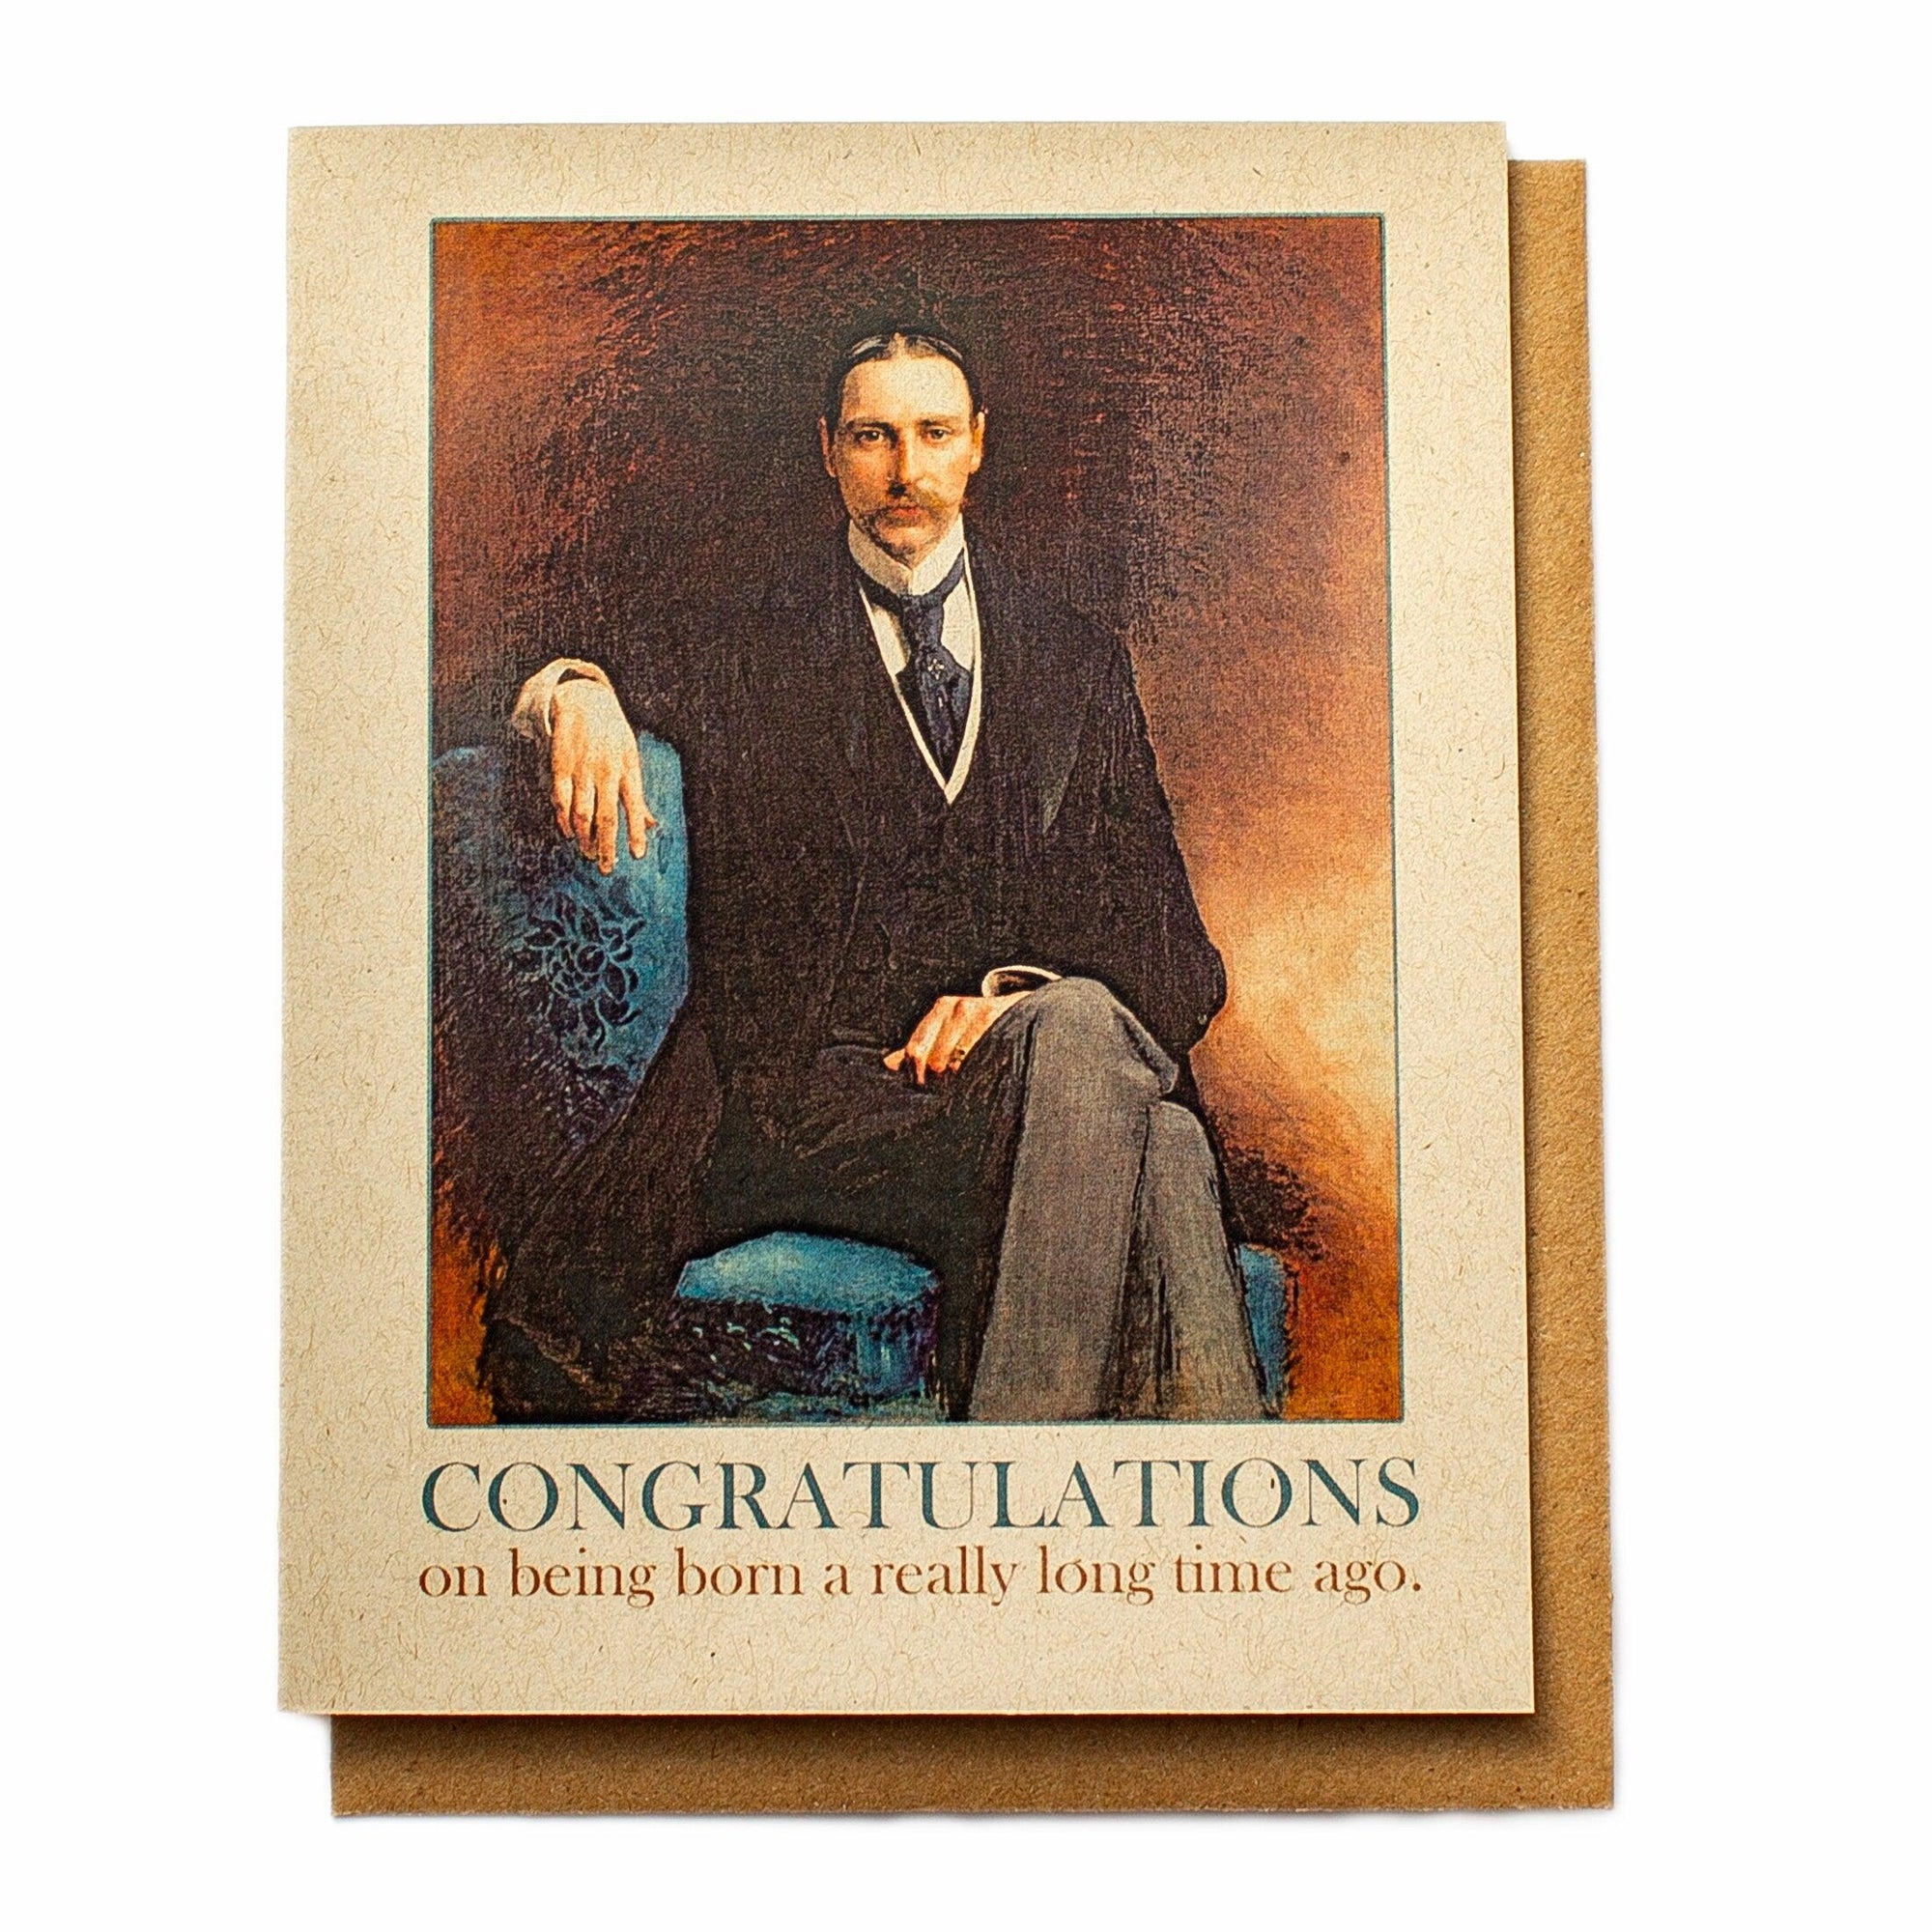 Funny Birthday Card - Gilded Age Vintage Old Man - Birthday Card for Mature Men - Congratulations on Being Born a Really Long Time Ago